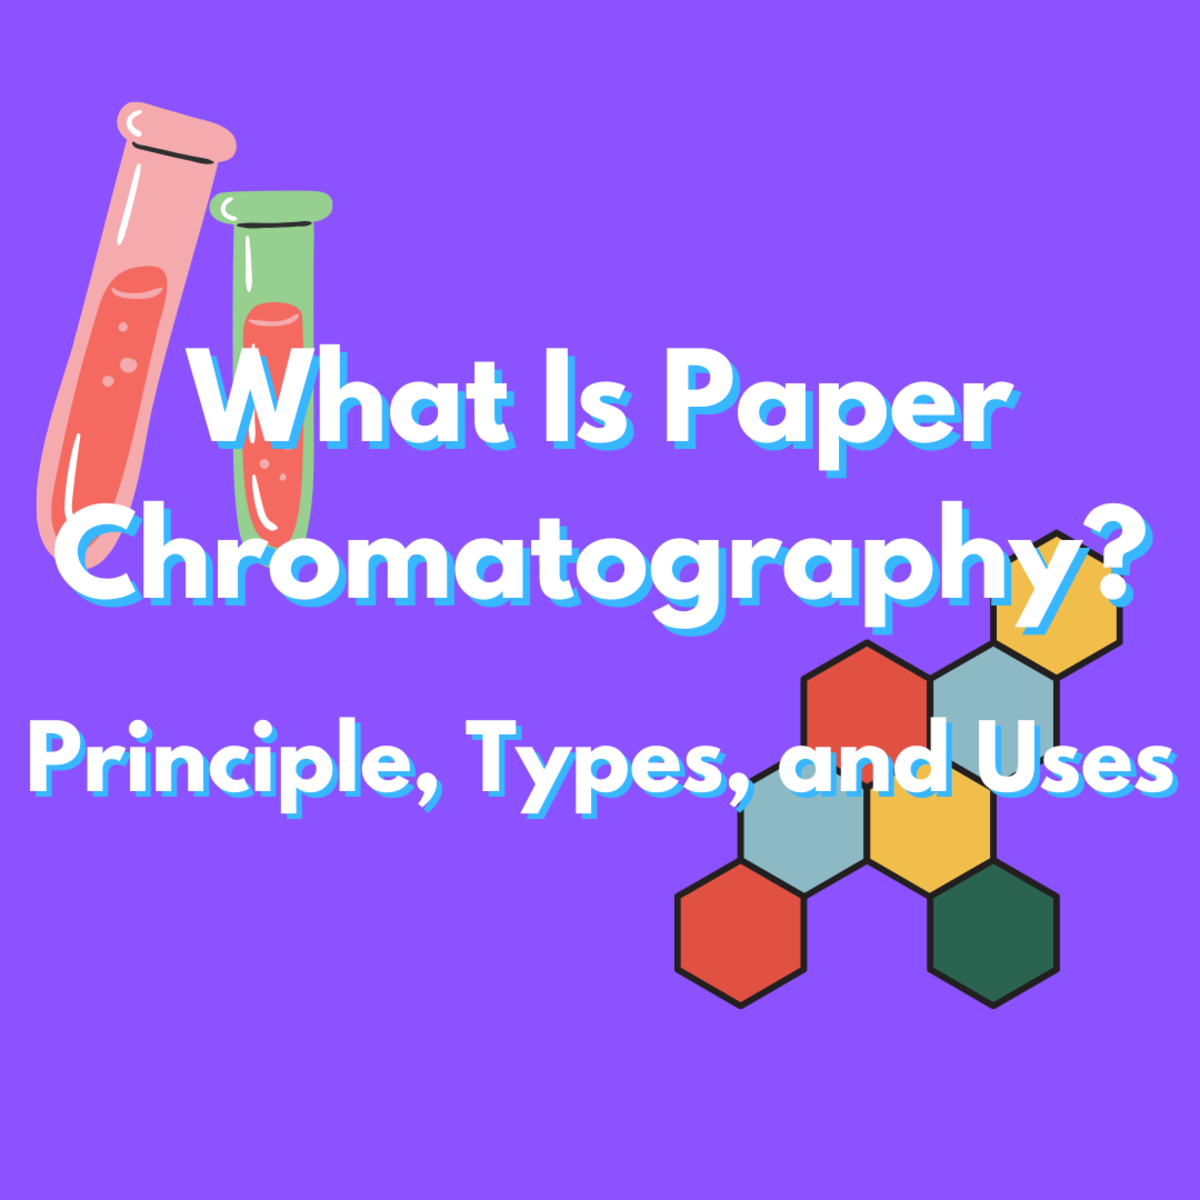 Read on to learn all about paper chromatography, including its principle, types, and applications.